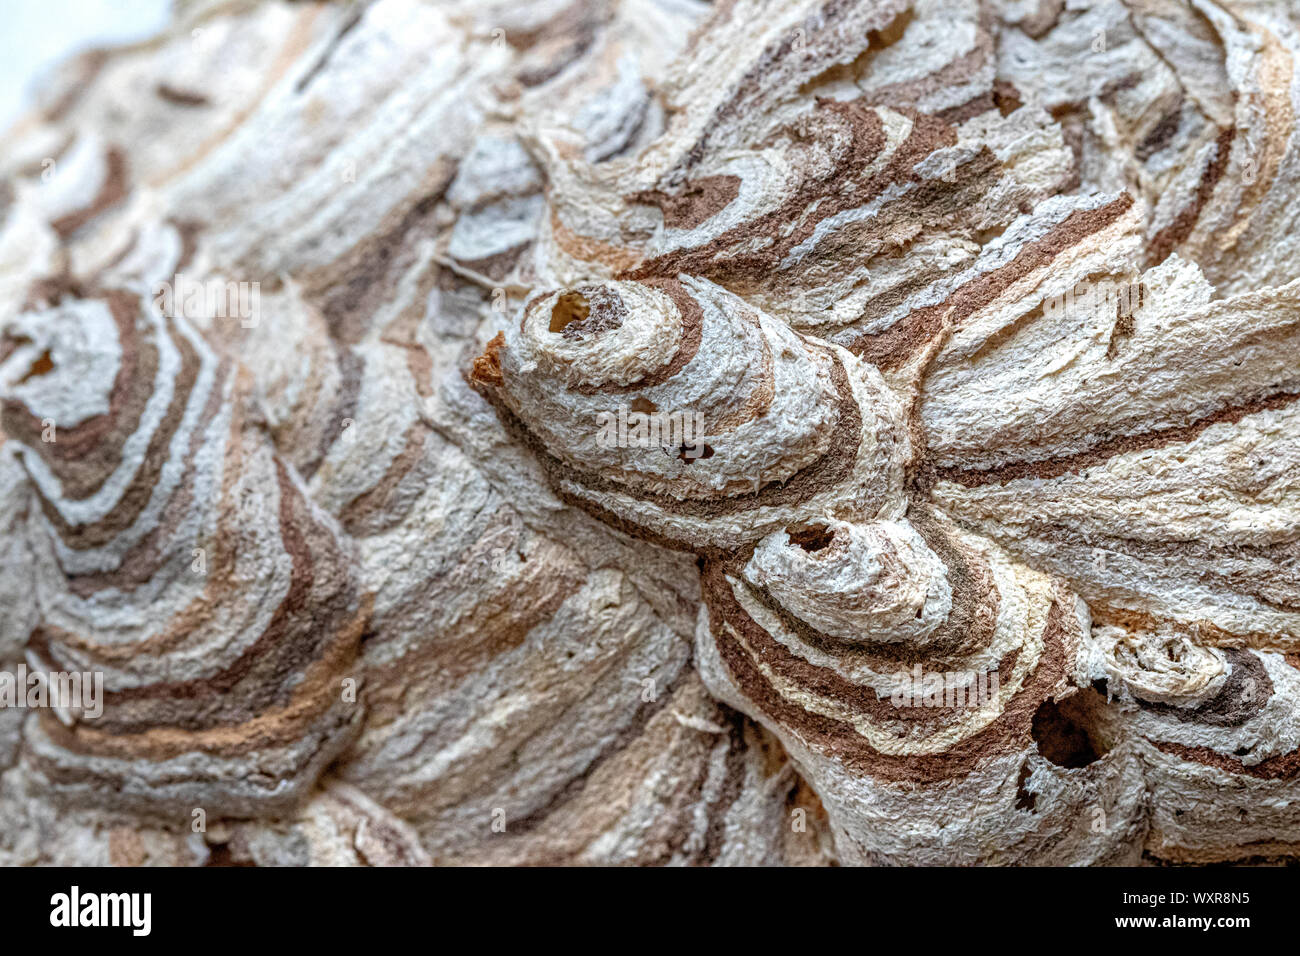 wasp nest close up detail pattern, insurance insect Stock Photo